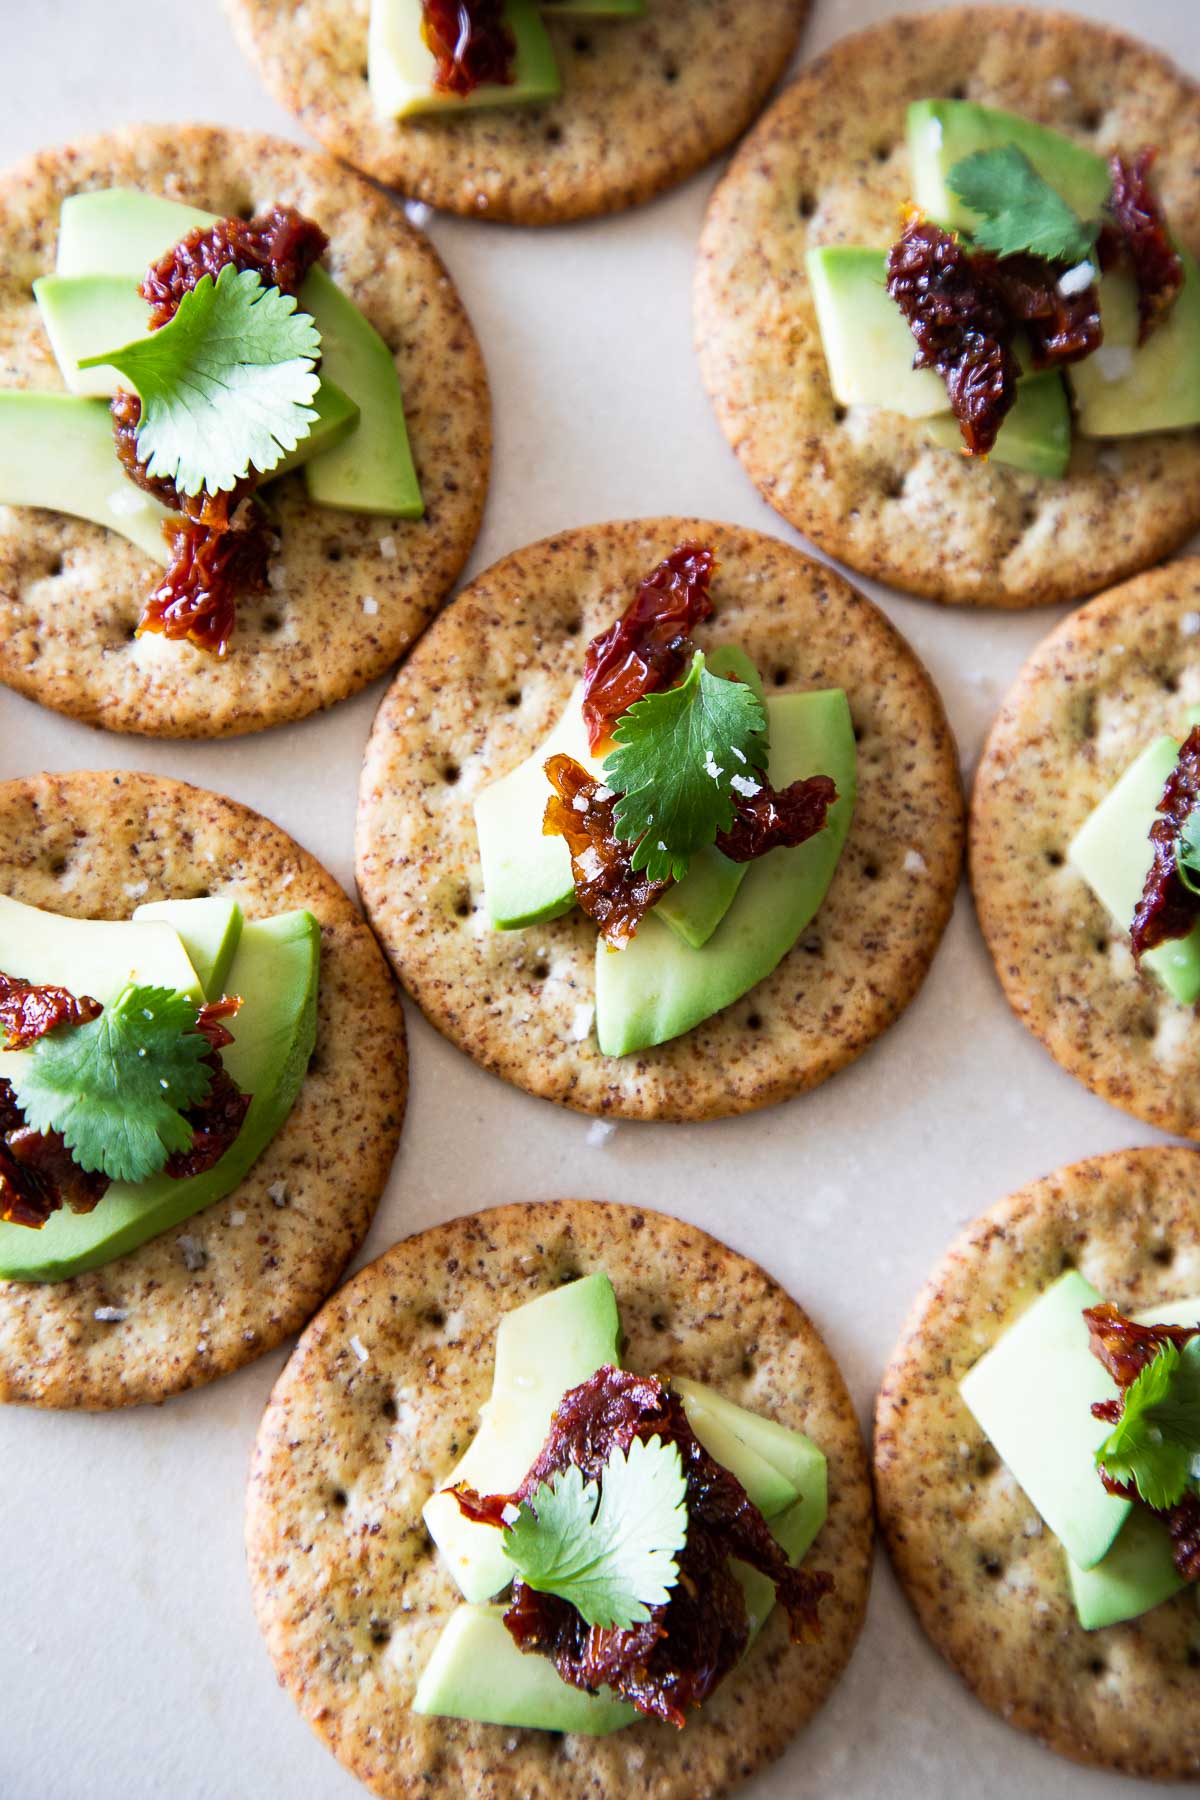 Avocado on Cracker Appetizer with Sundried tomatoes and cilantro